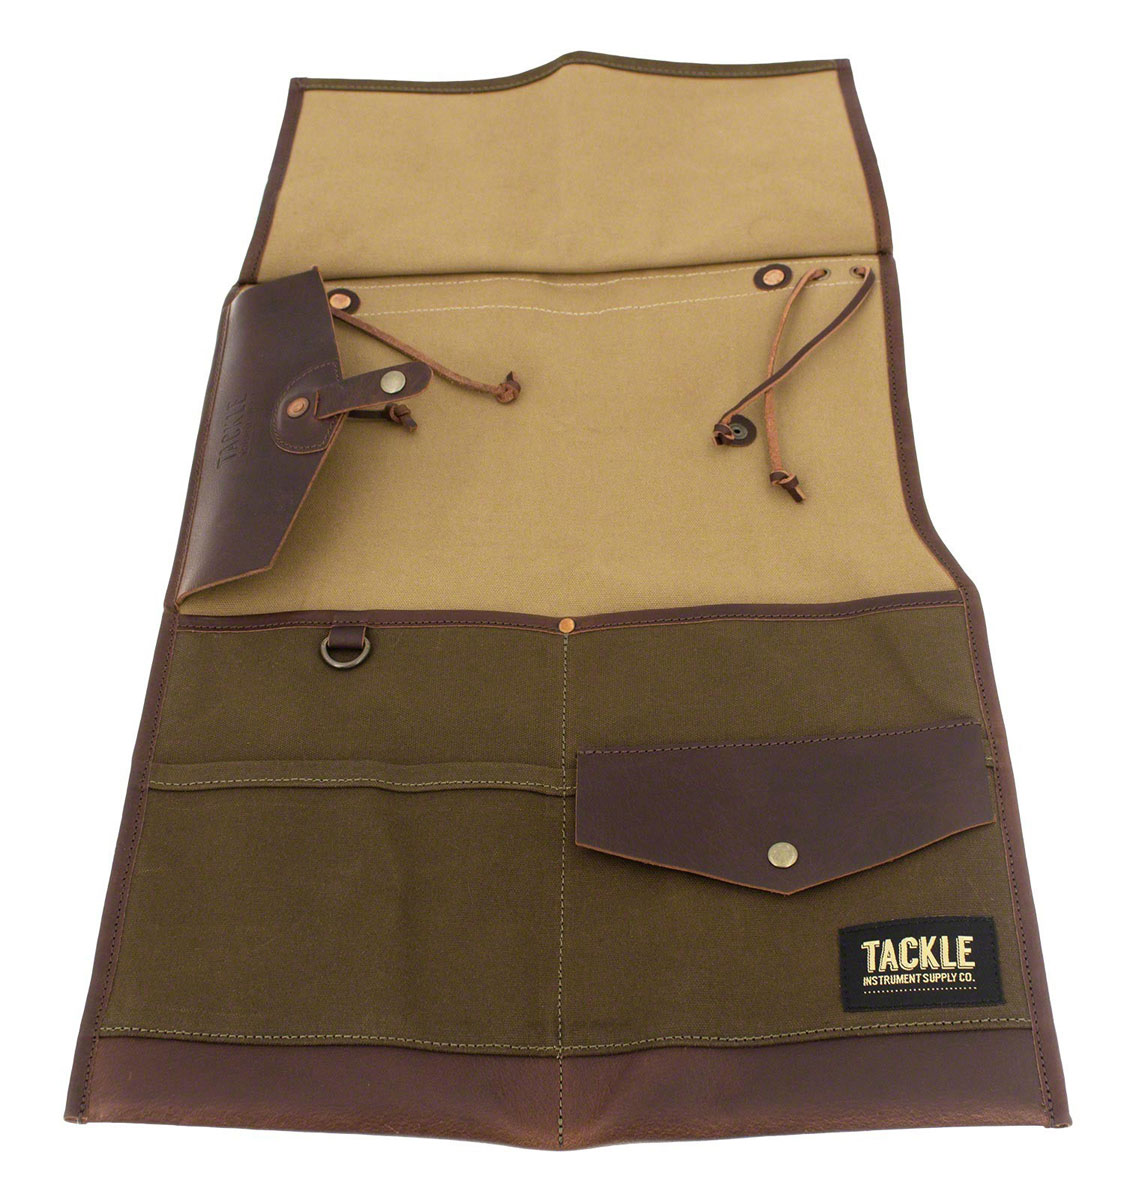 TACKLE INSTRUMENTS WAXED CANVAS BI-FOLD STICK CASE - FOREST GREEN